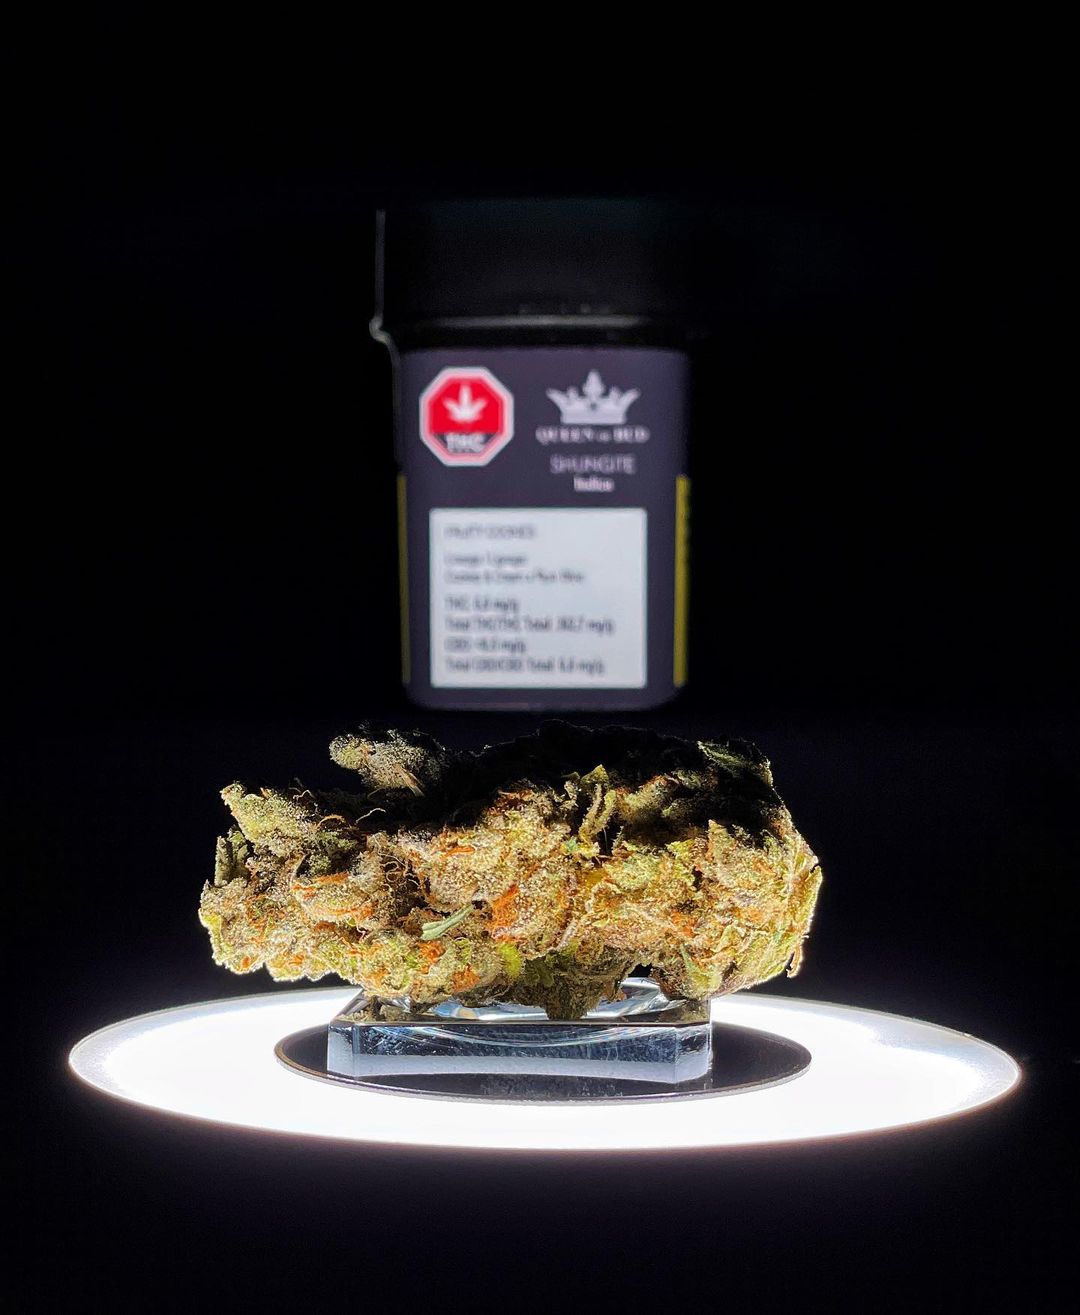 Cannabis Strain, Strain Review: Carly, Budtender @ Stok&#8217;d